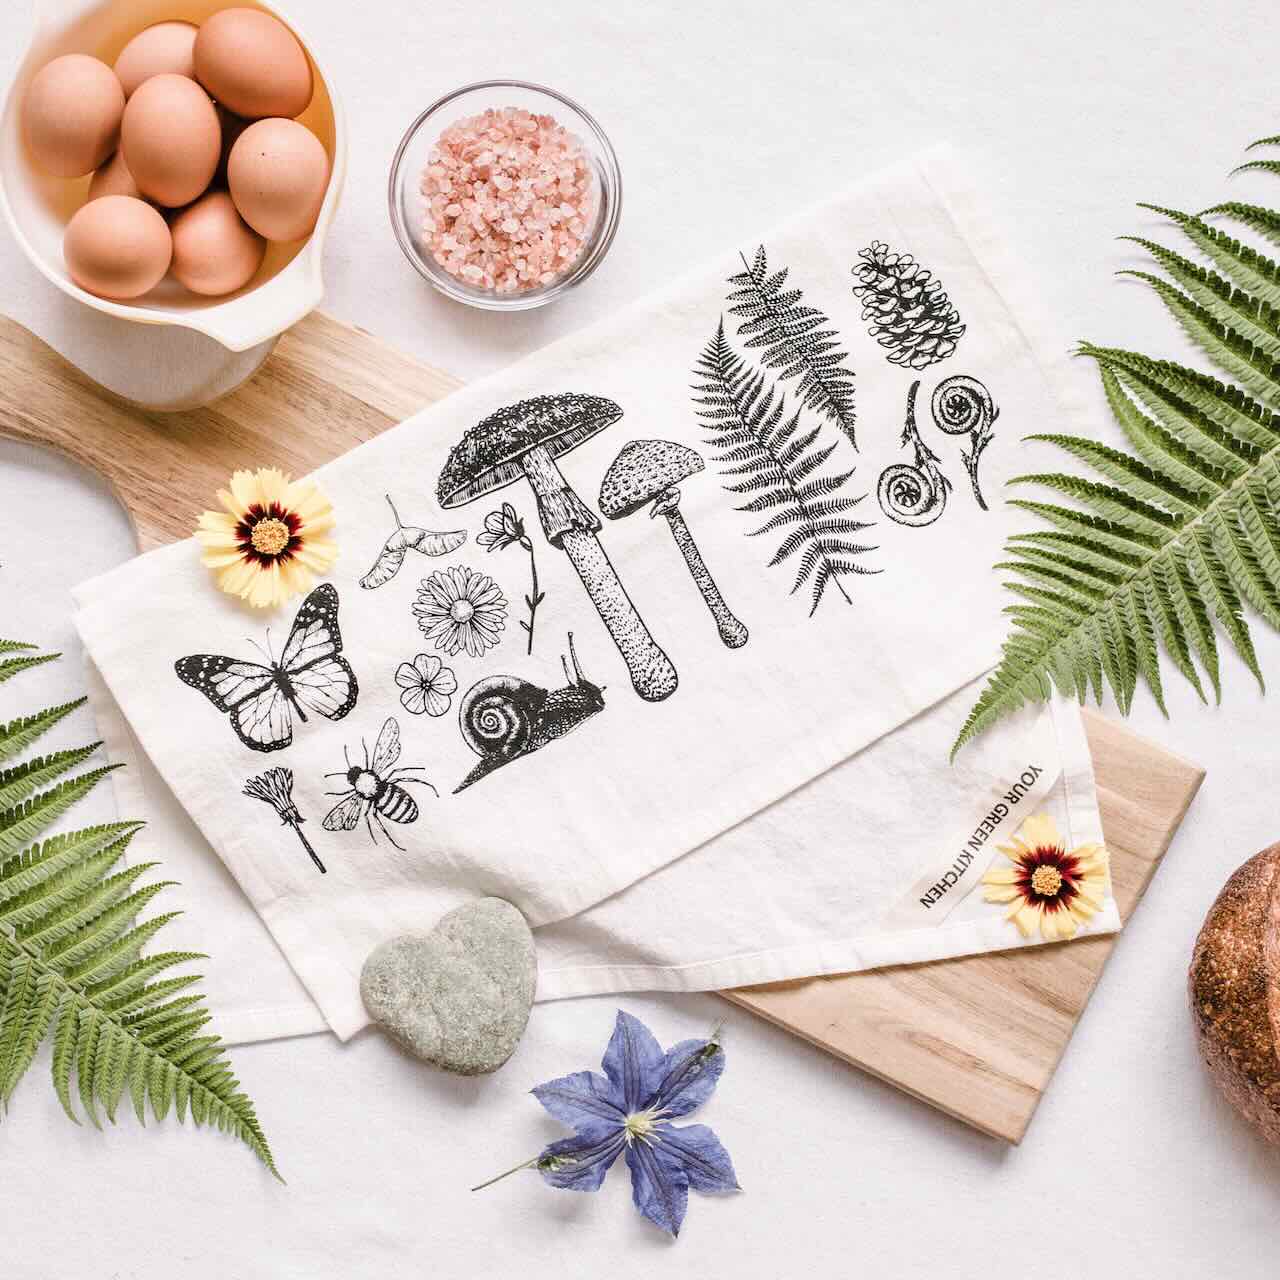 A white kitchen tea towel with a selection of plants, animals that are typically associated with an autumn forest, printed on, laying casually on top of a wooden chopping board, with pink sea salt, eggs and blue flower as decoration pieces around it.